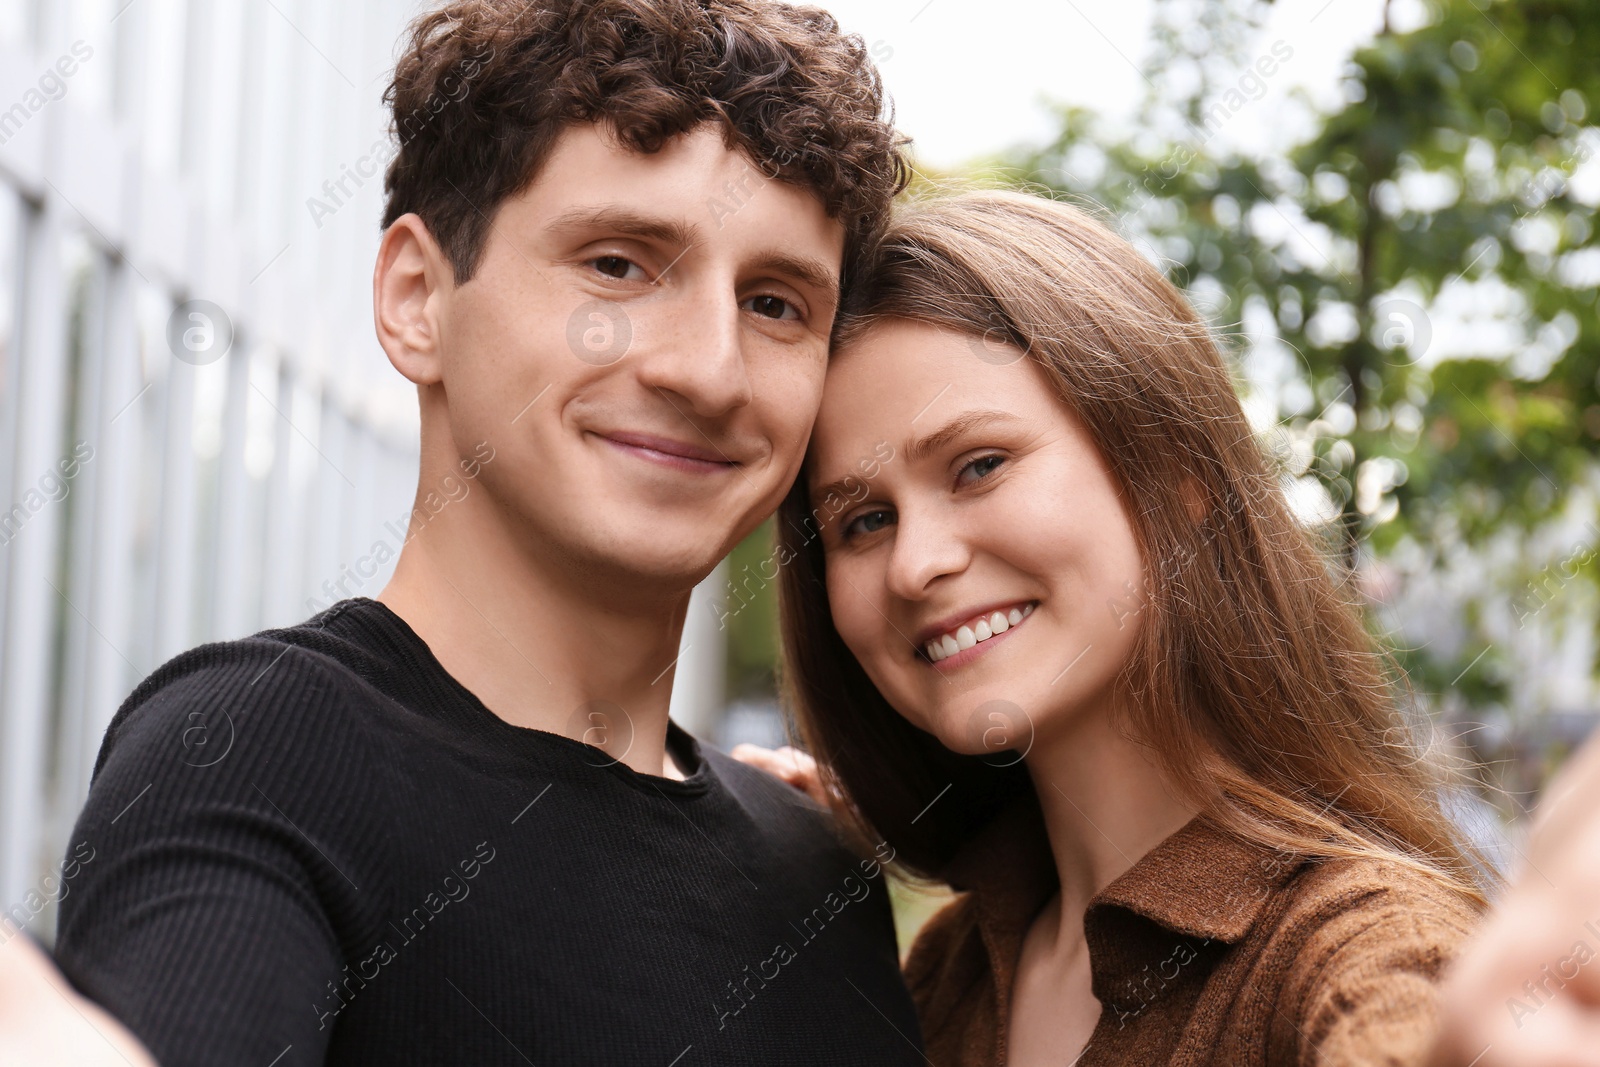 Photo of International dating. Lovely young couple taking selfie outdoors